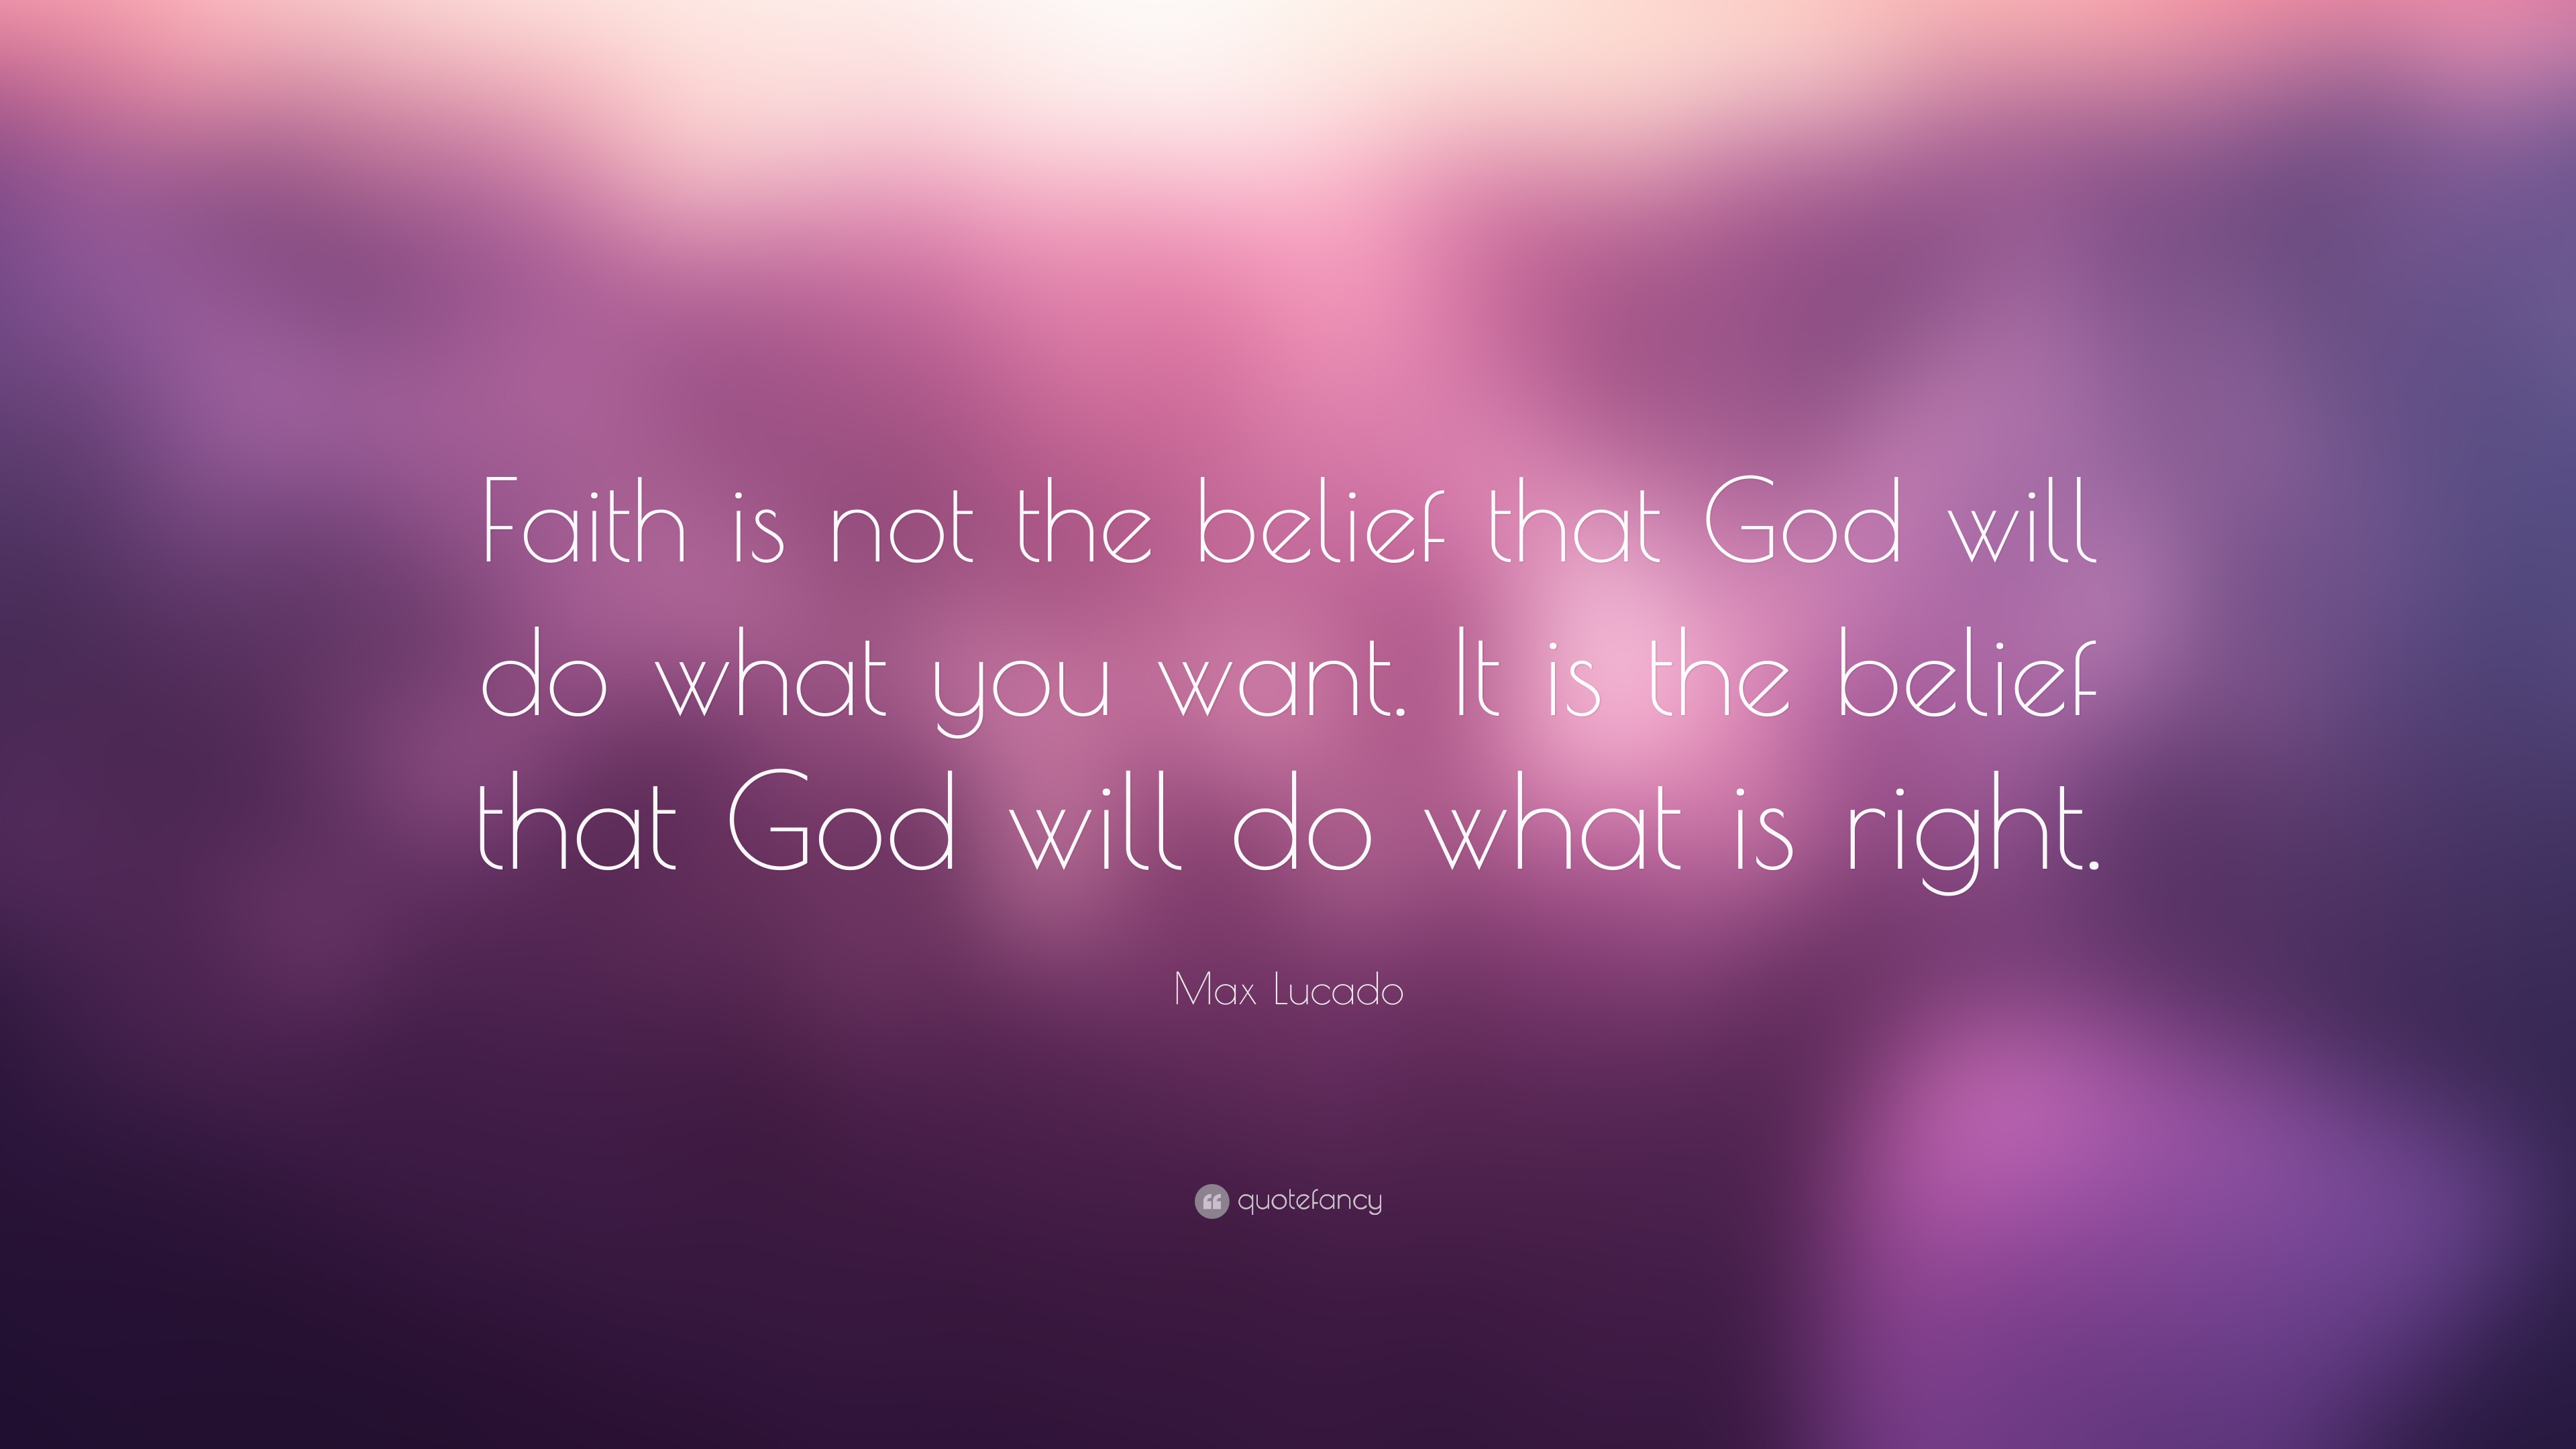 49590-Max-Lucado-Quote-Faith-is-not-the-belief-that-God-will-do-what-you.jpg